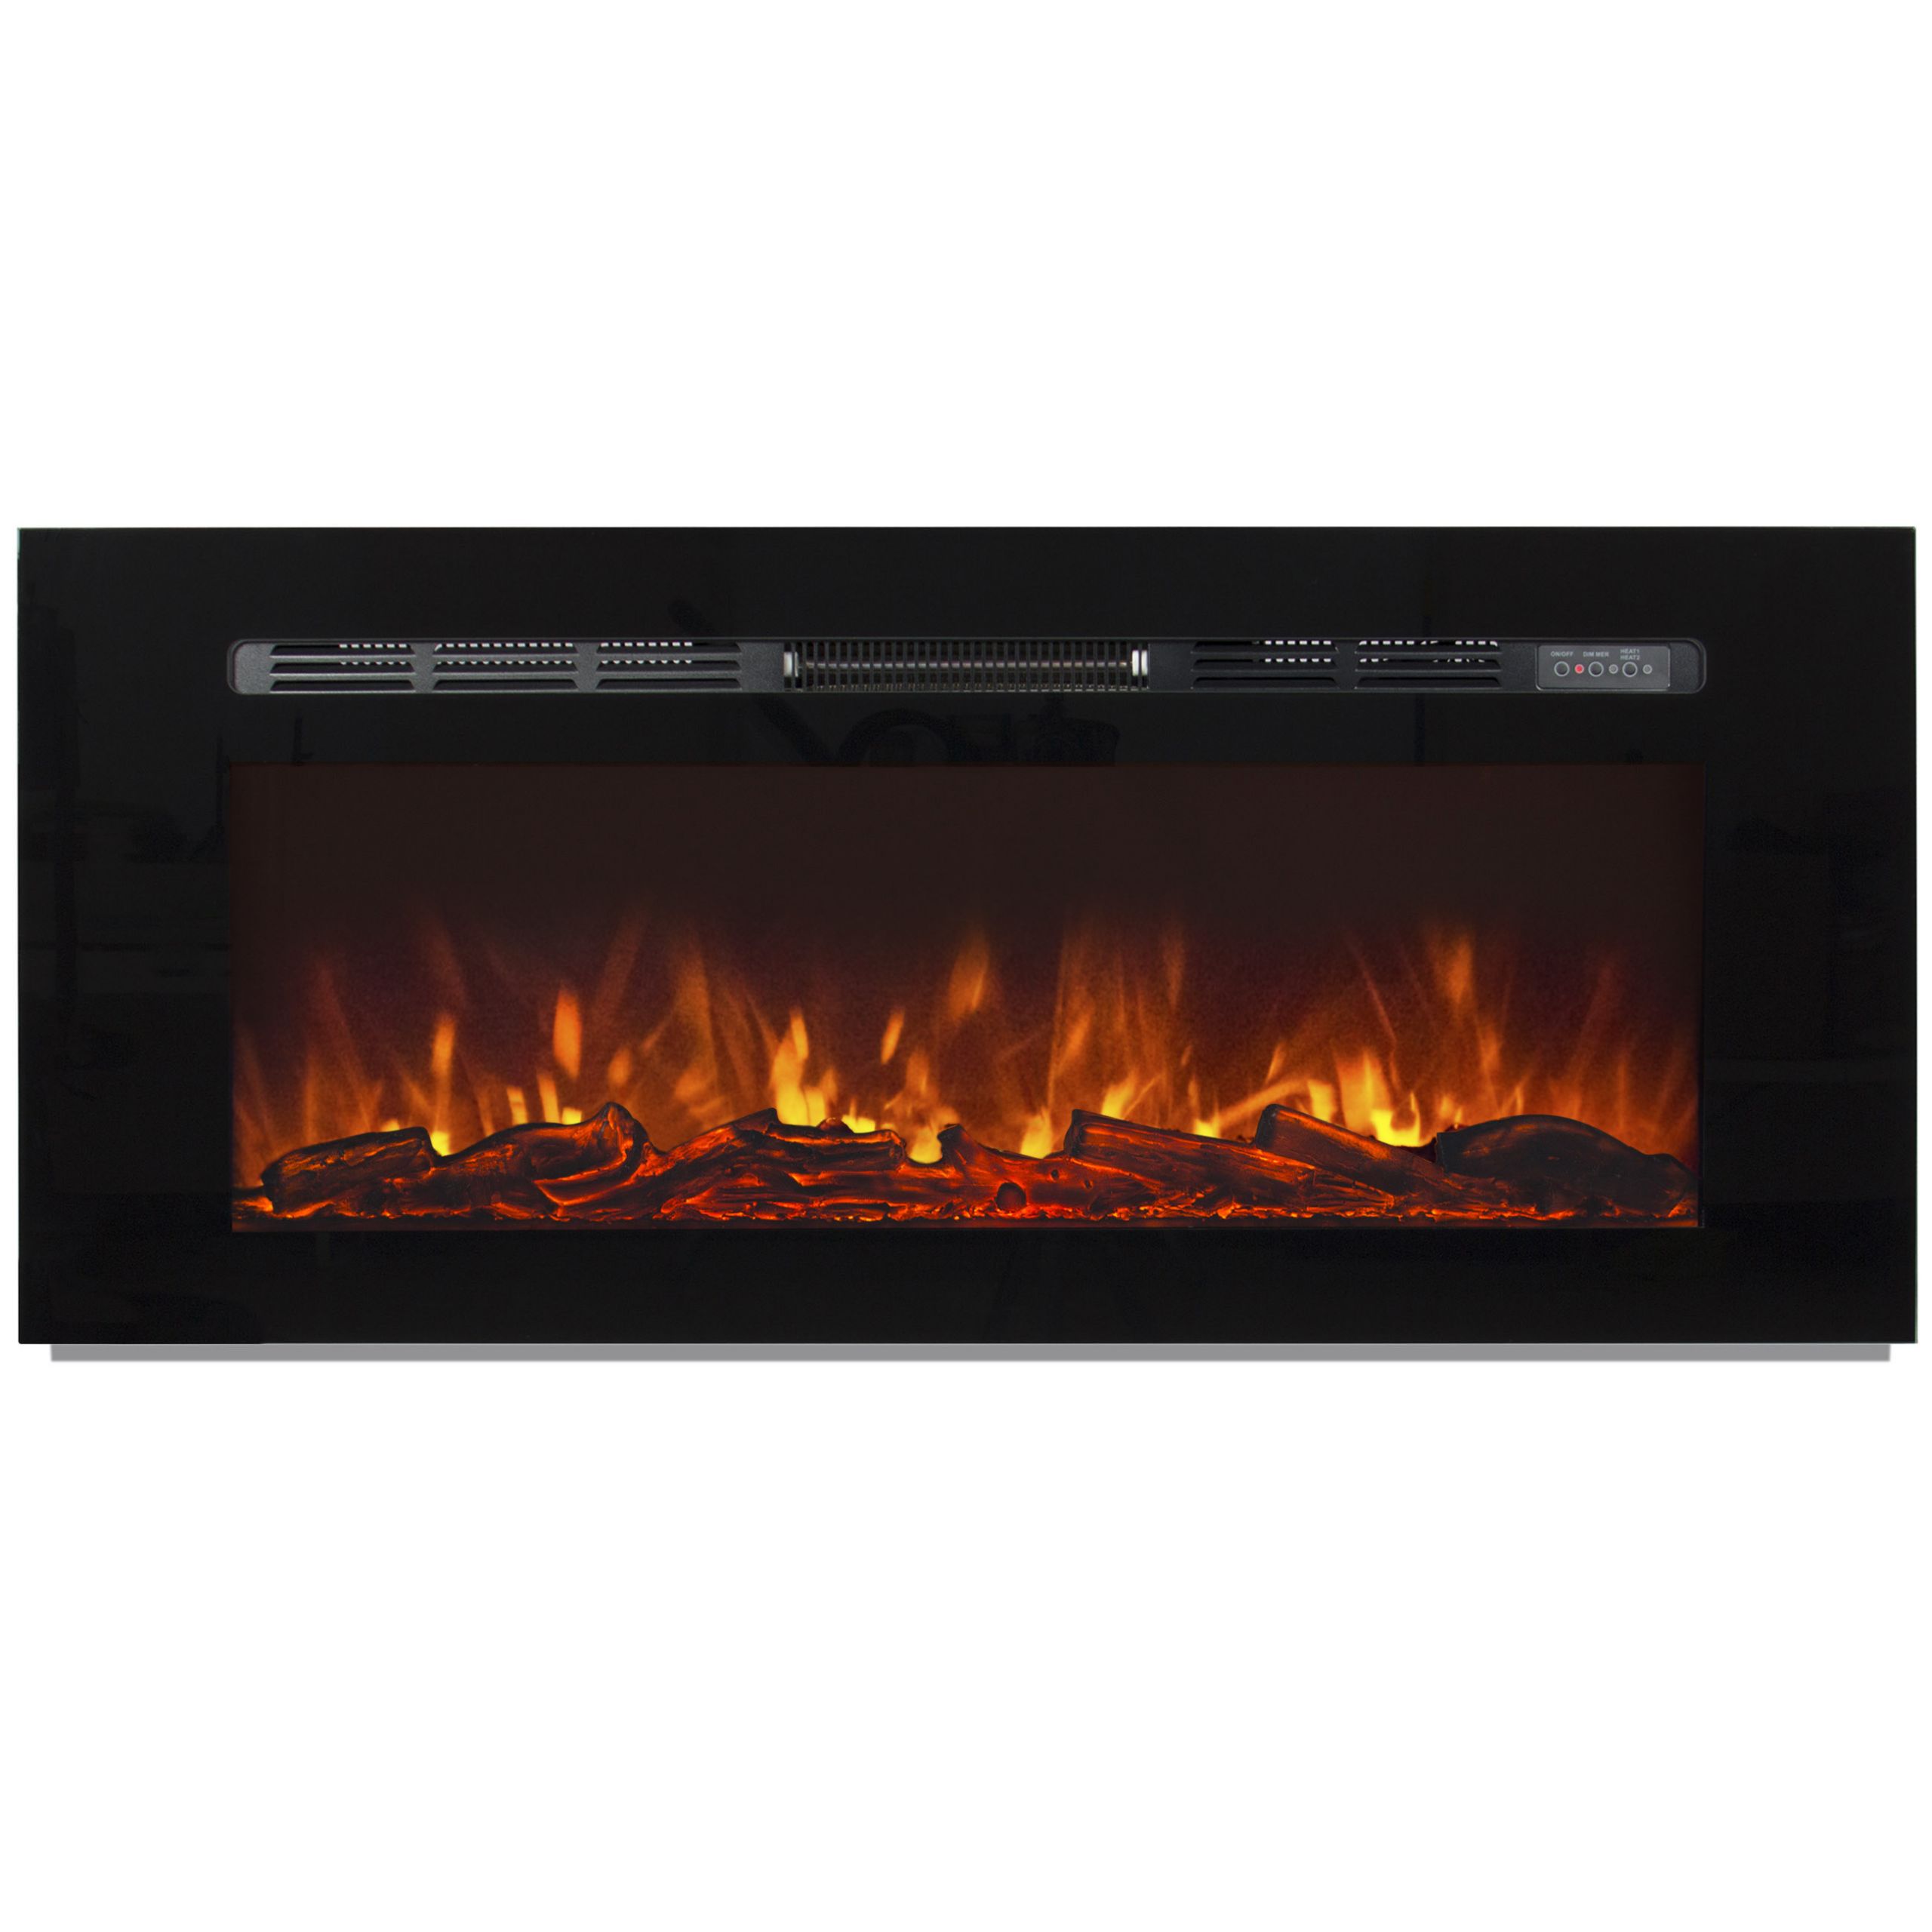 Recessed Wall Mount Electric Fireplace
 1500W Heat Adjustable 50" In Wall Recessed Electric